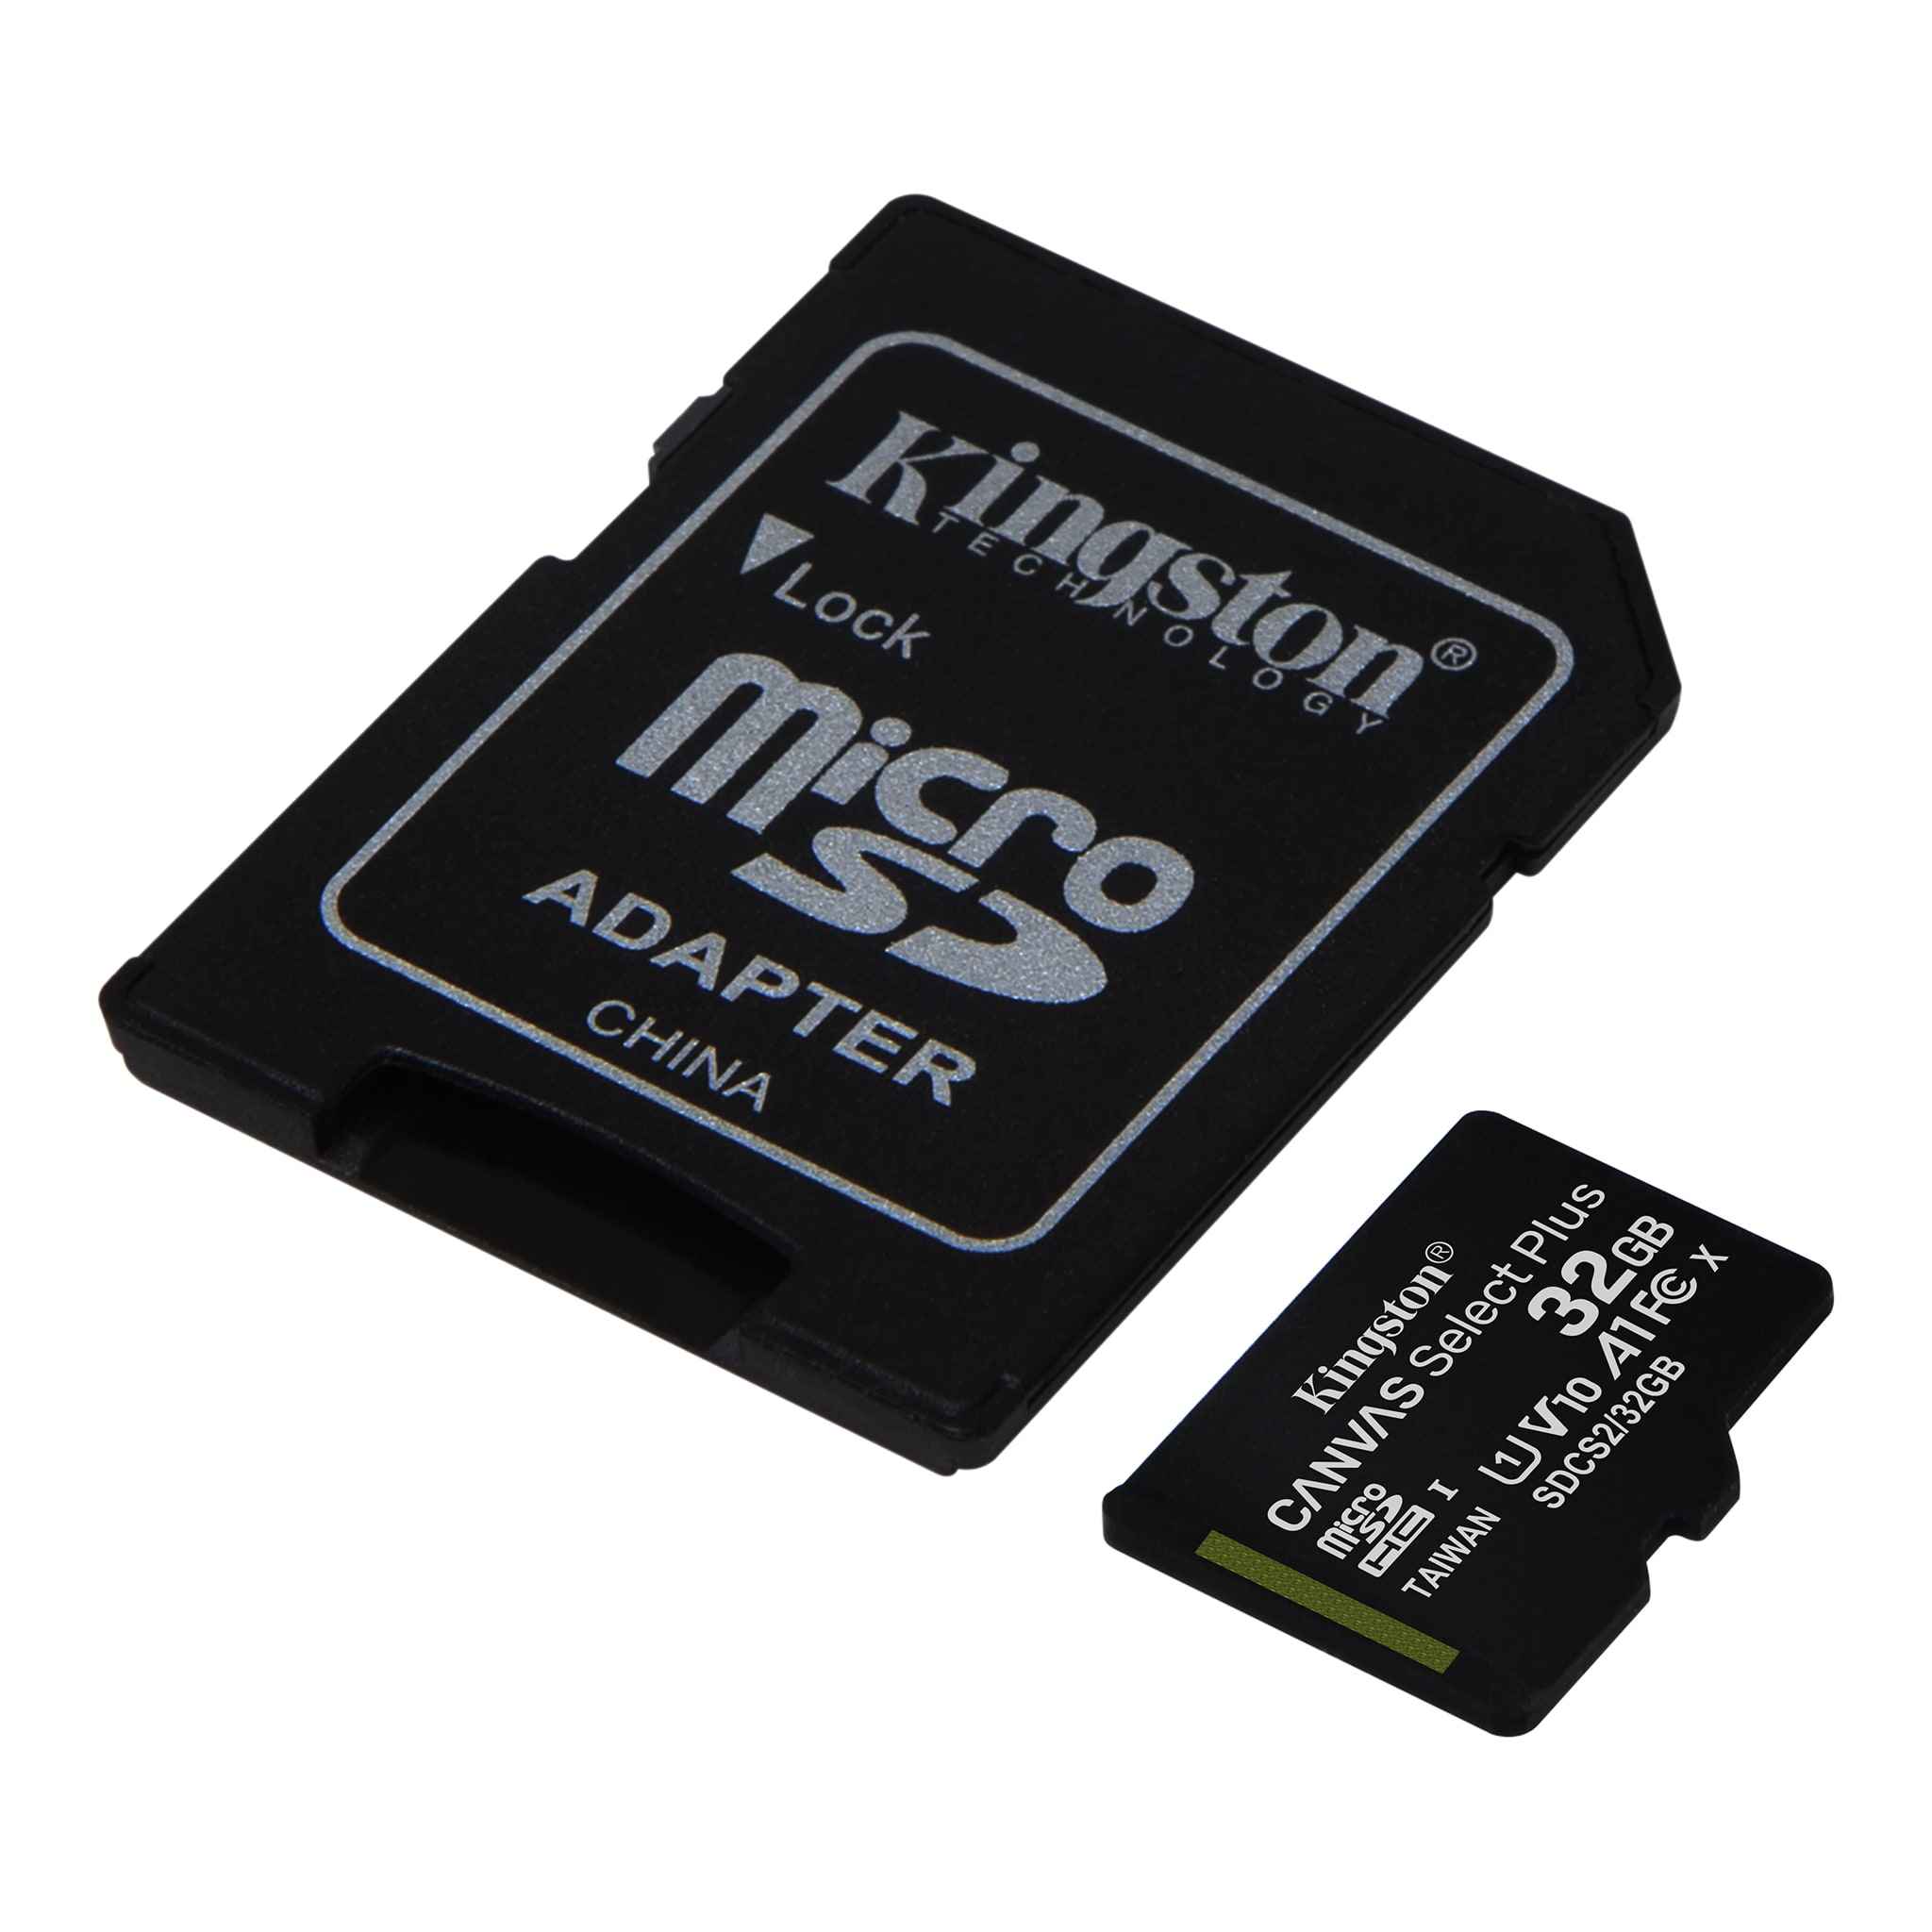 Kingston 512GB Toshiba Excite 10 MicroSDXC Canvas Select Plus Card Verified by SanFlash. 100MBs Works with Kingston